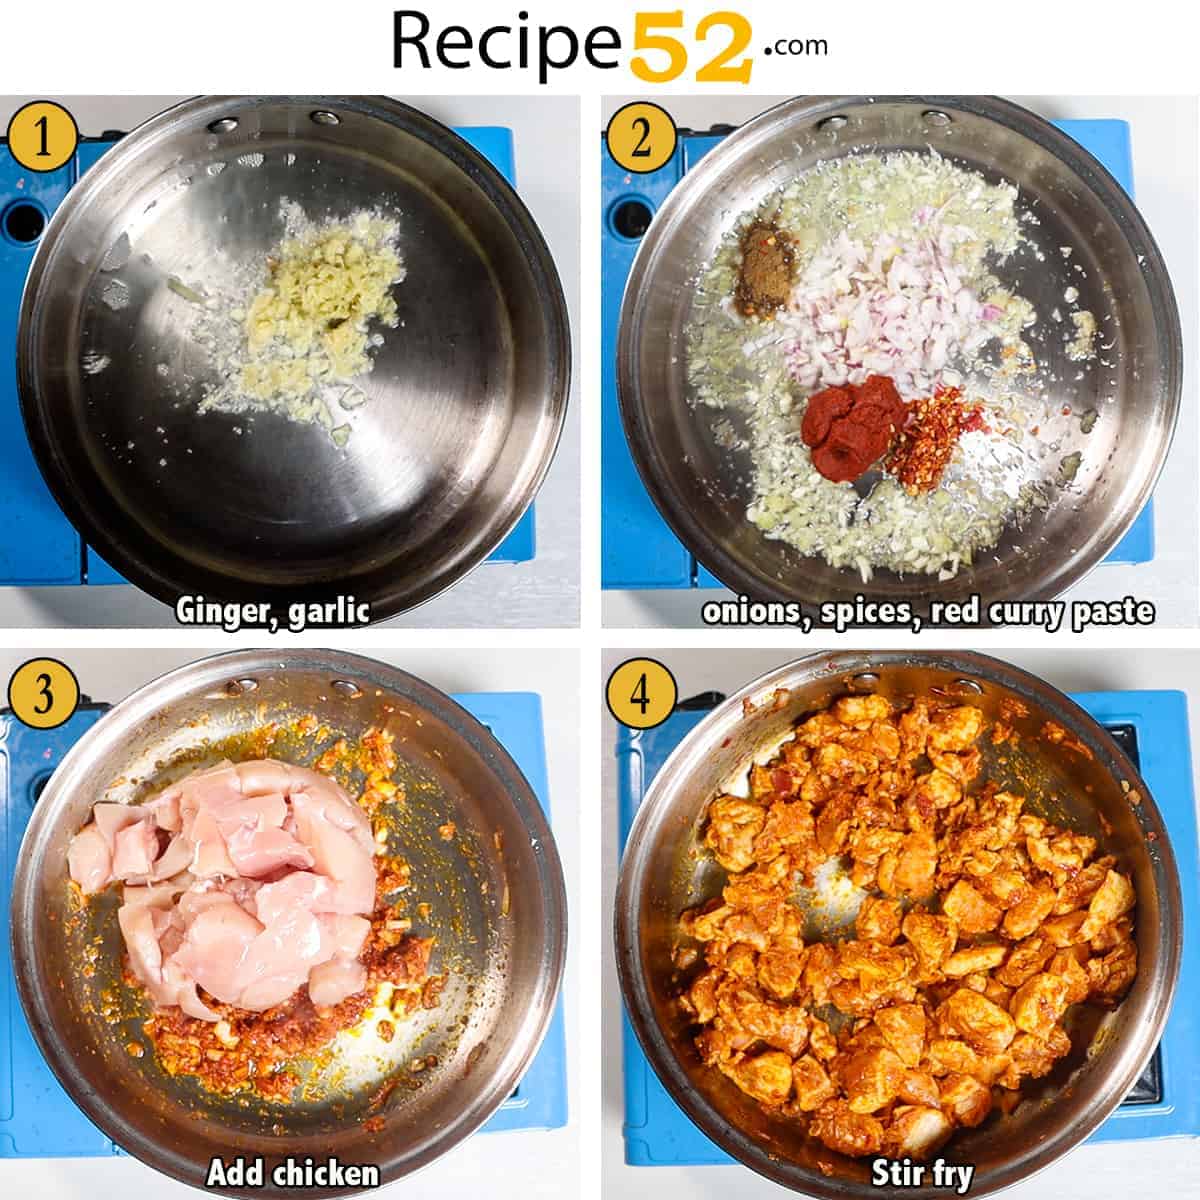 Steps for cook chicken.